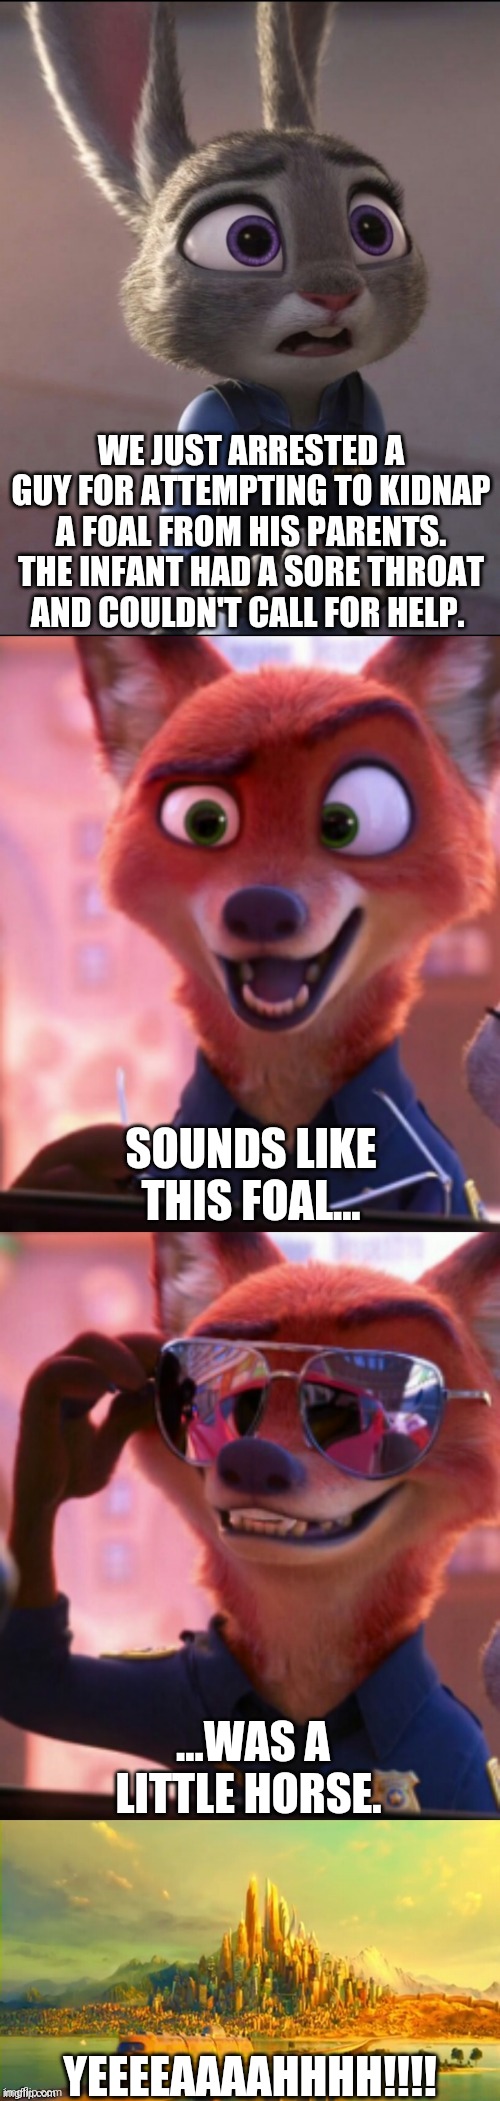 CSI: Zootopia 33 |  WE JUST ARRESTED A GUY FOR ATTEMPTING TO KIDNAP A FOAL FROM HIS PARENTS. THE INFANT HAD A SORE THROAT AND COULDN'T CALL FOR HELP. SOUNDS LIKE THIS FOAL... ...WAS A LITTLE HORSE. YEEEEAAAAHHHH!!!! | image tagged in csi zootopia,zootopia,judy hopps,nick wilde,parody,funny | made w/ Imgflip meme maker